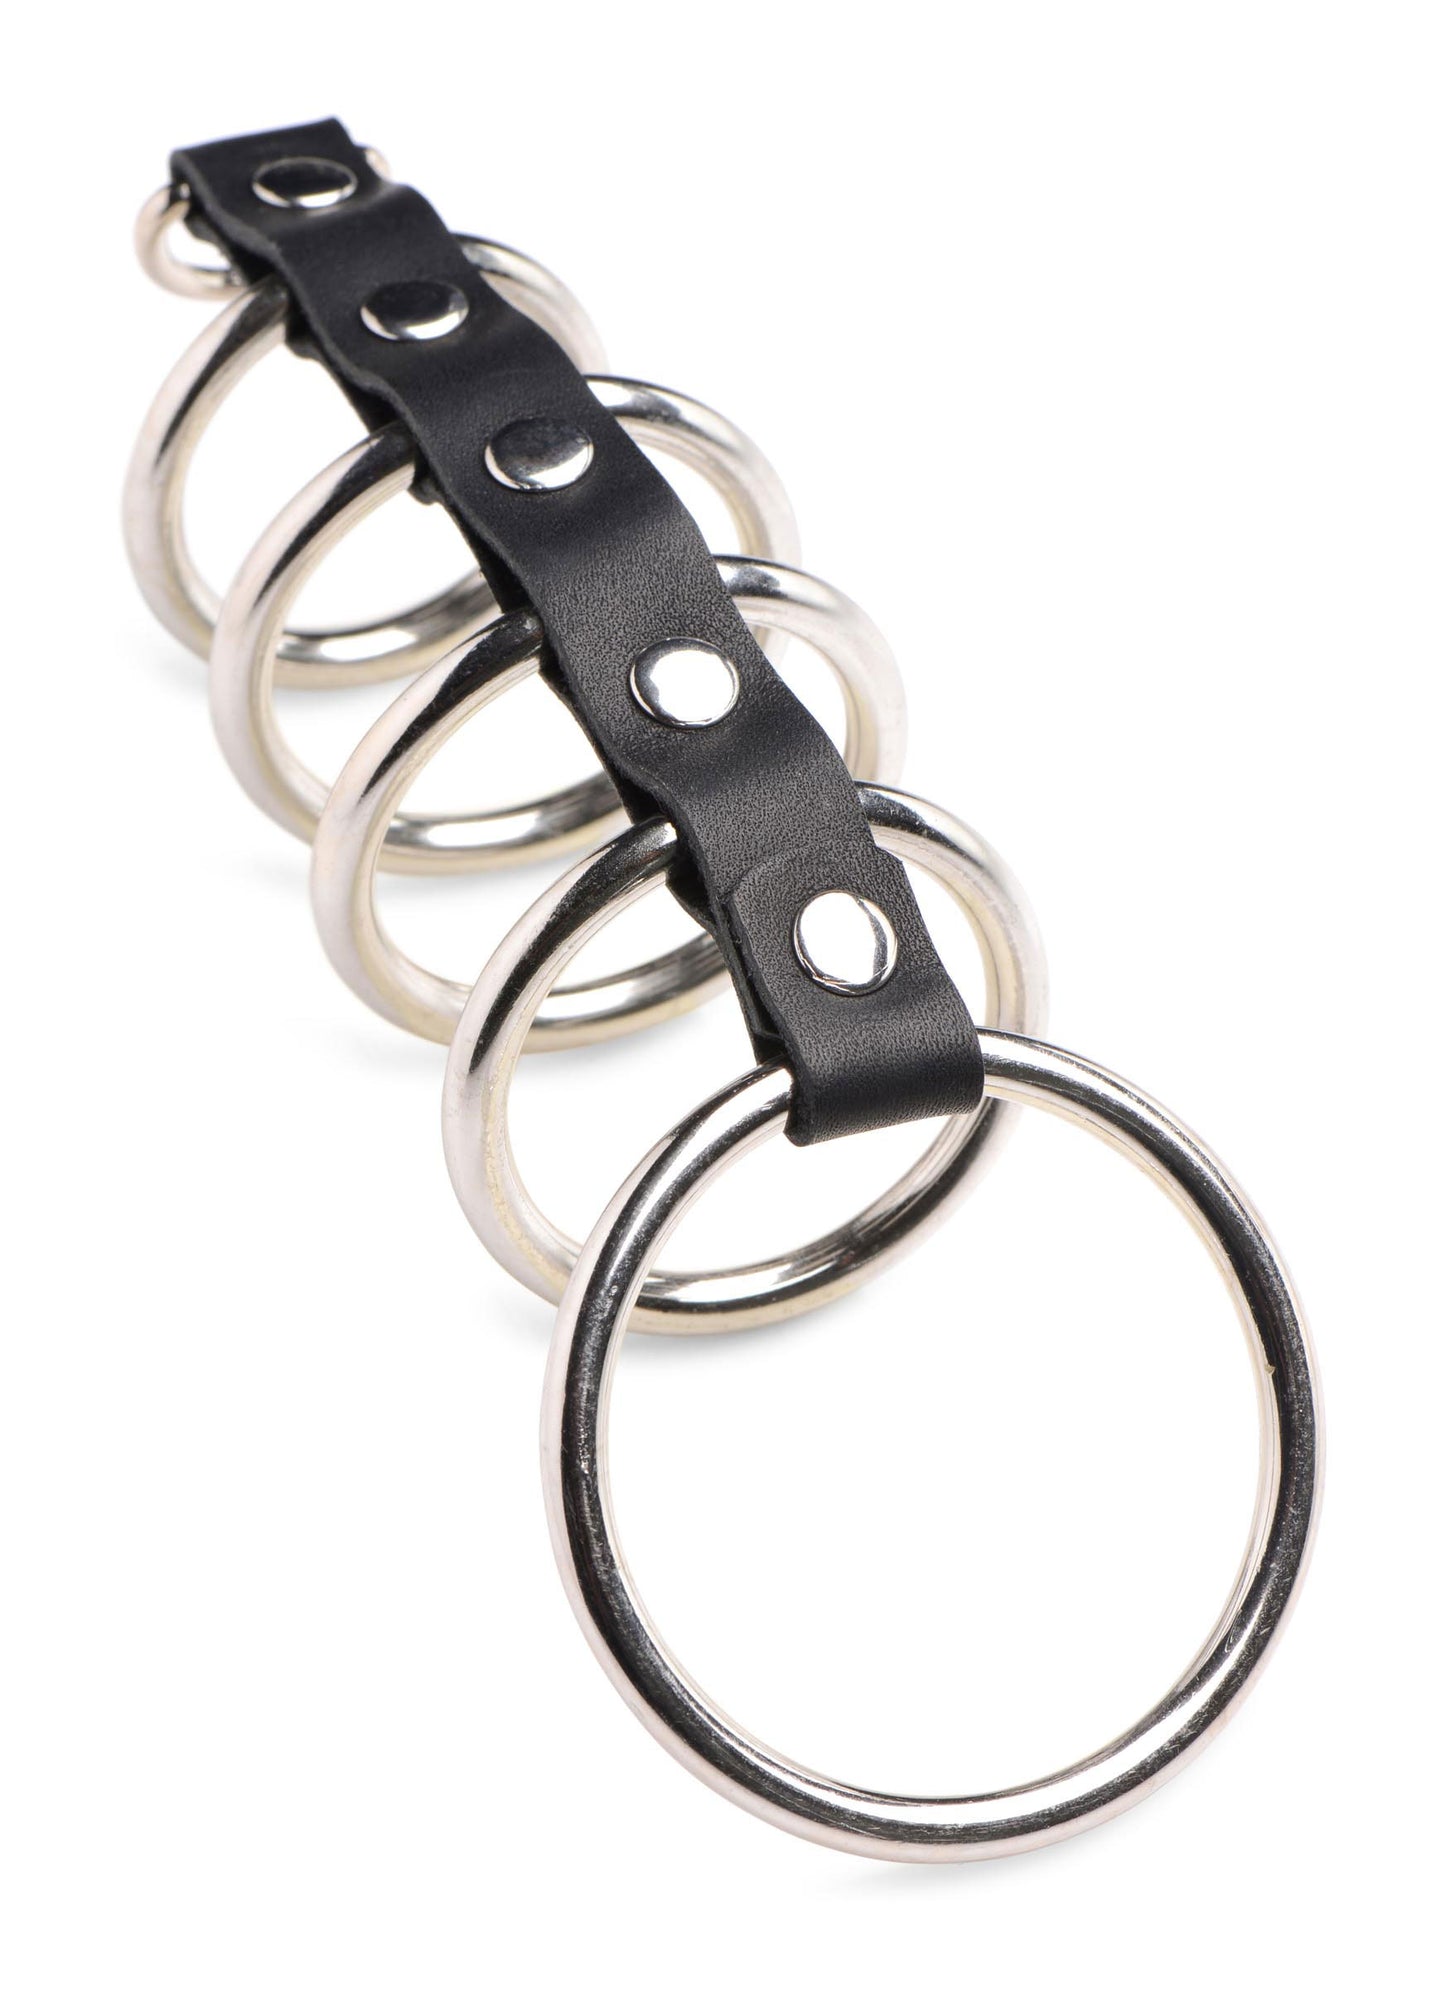 Cock Gear Gates of Hell Chastity Device - Black STR-AG848